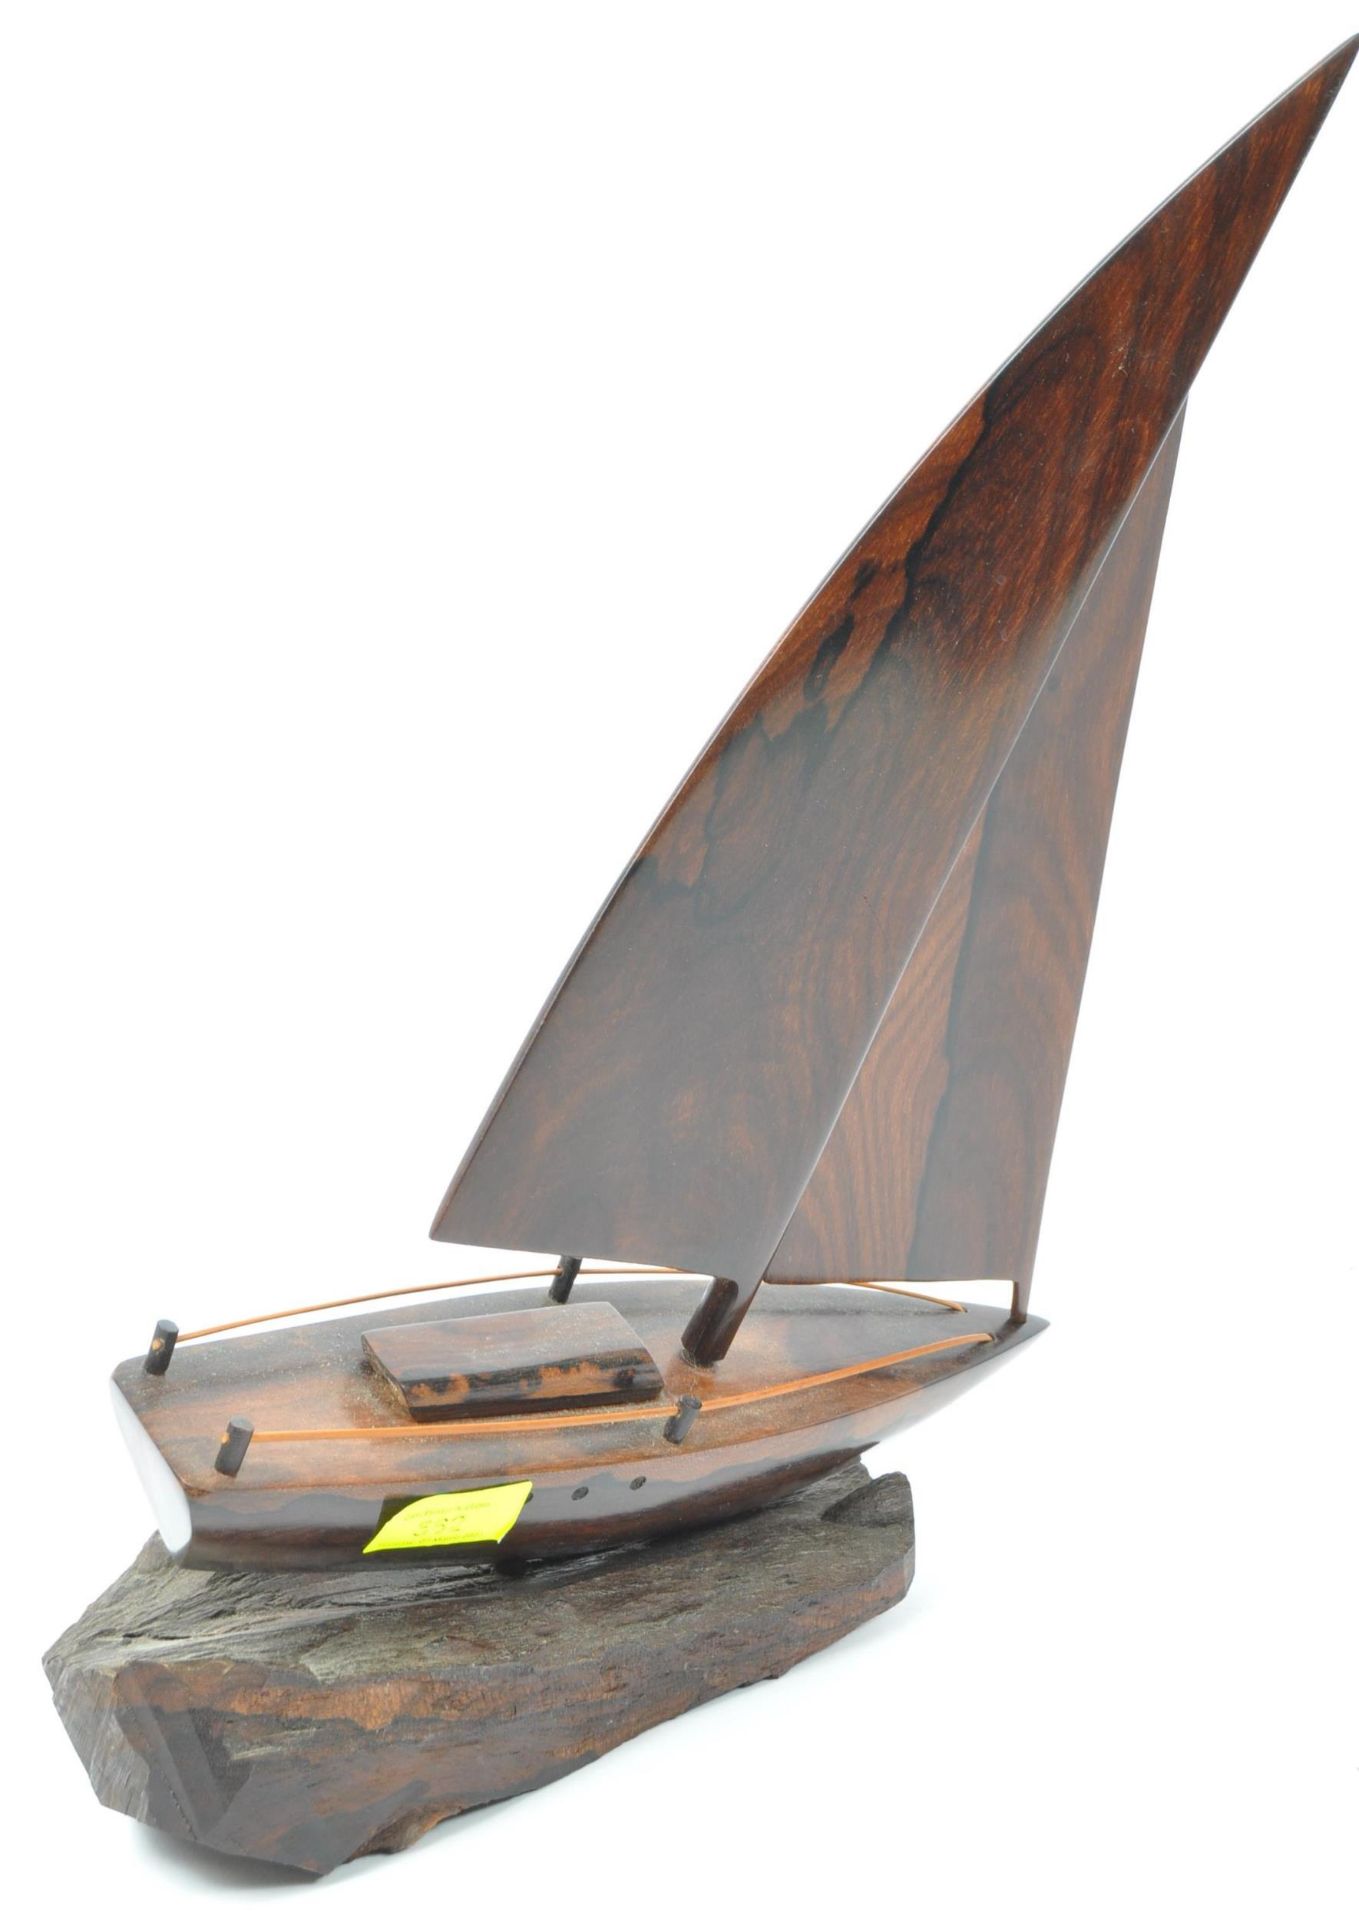 ART DECO STYLE CARVED HARDWOOD MODEL OF A YACHT - Image 4 of 5